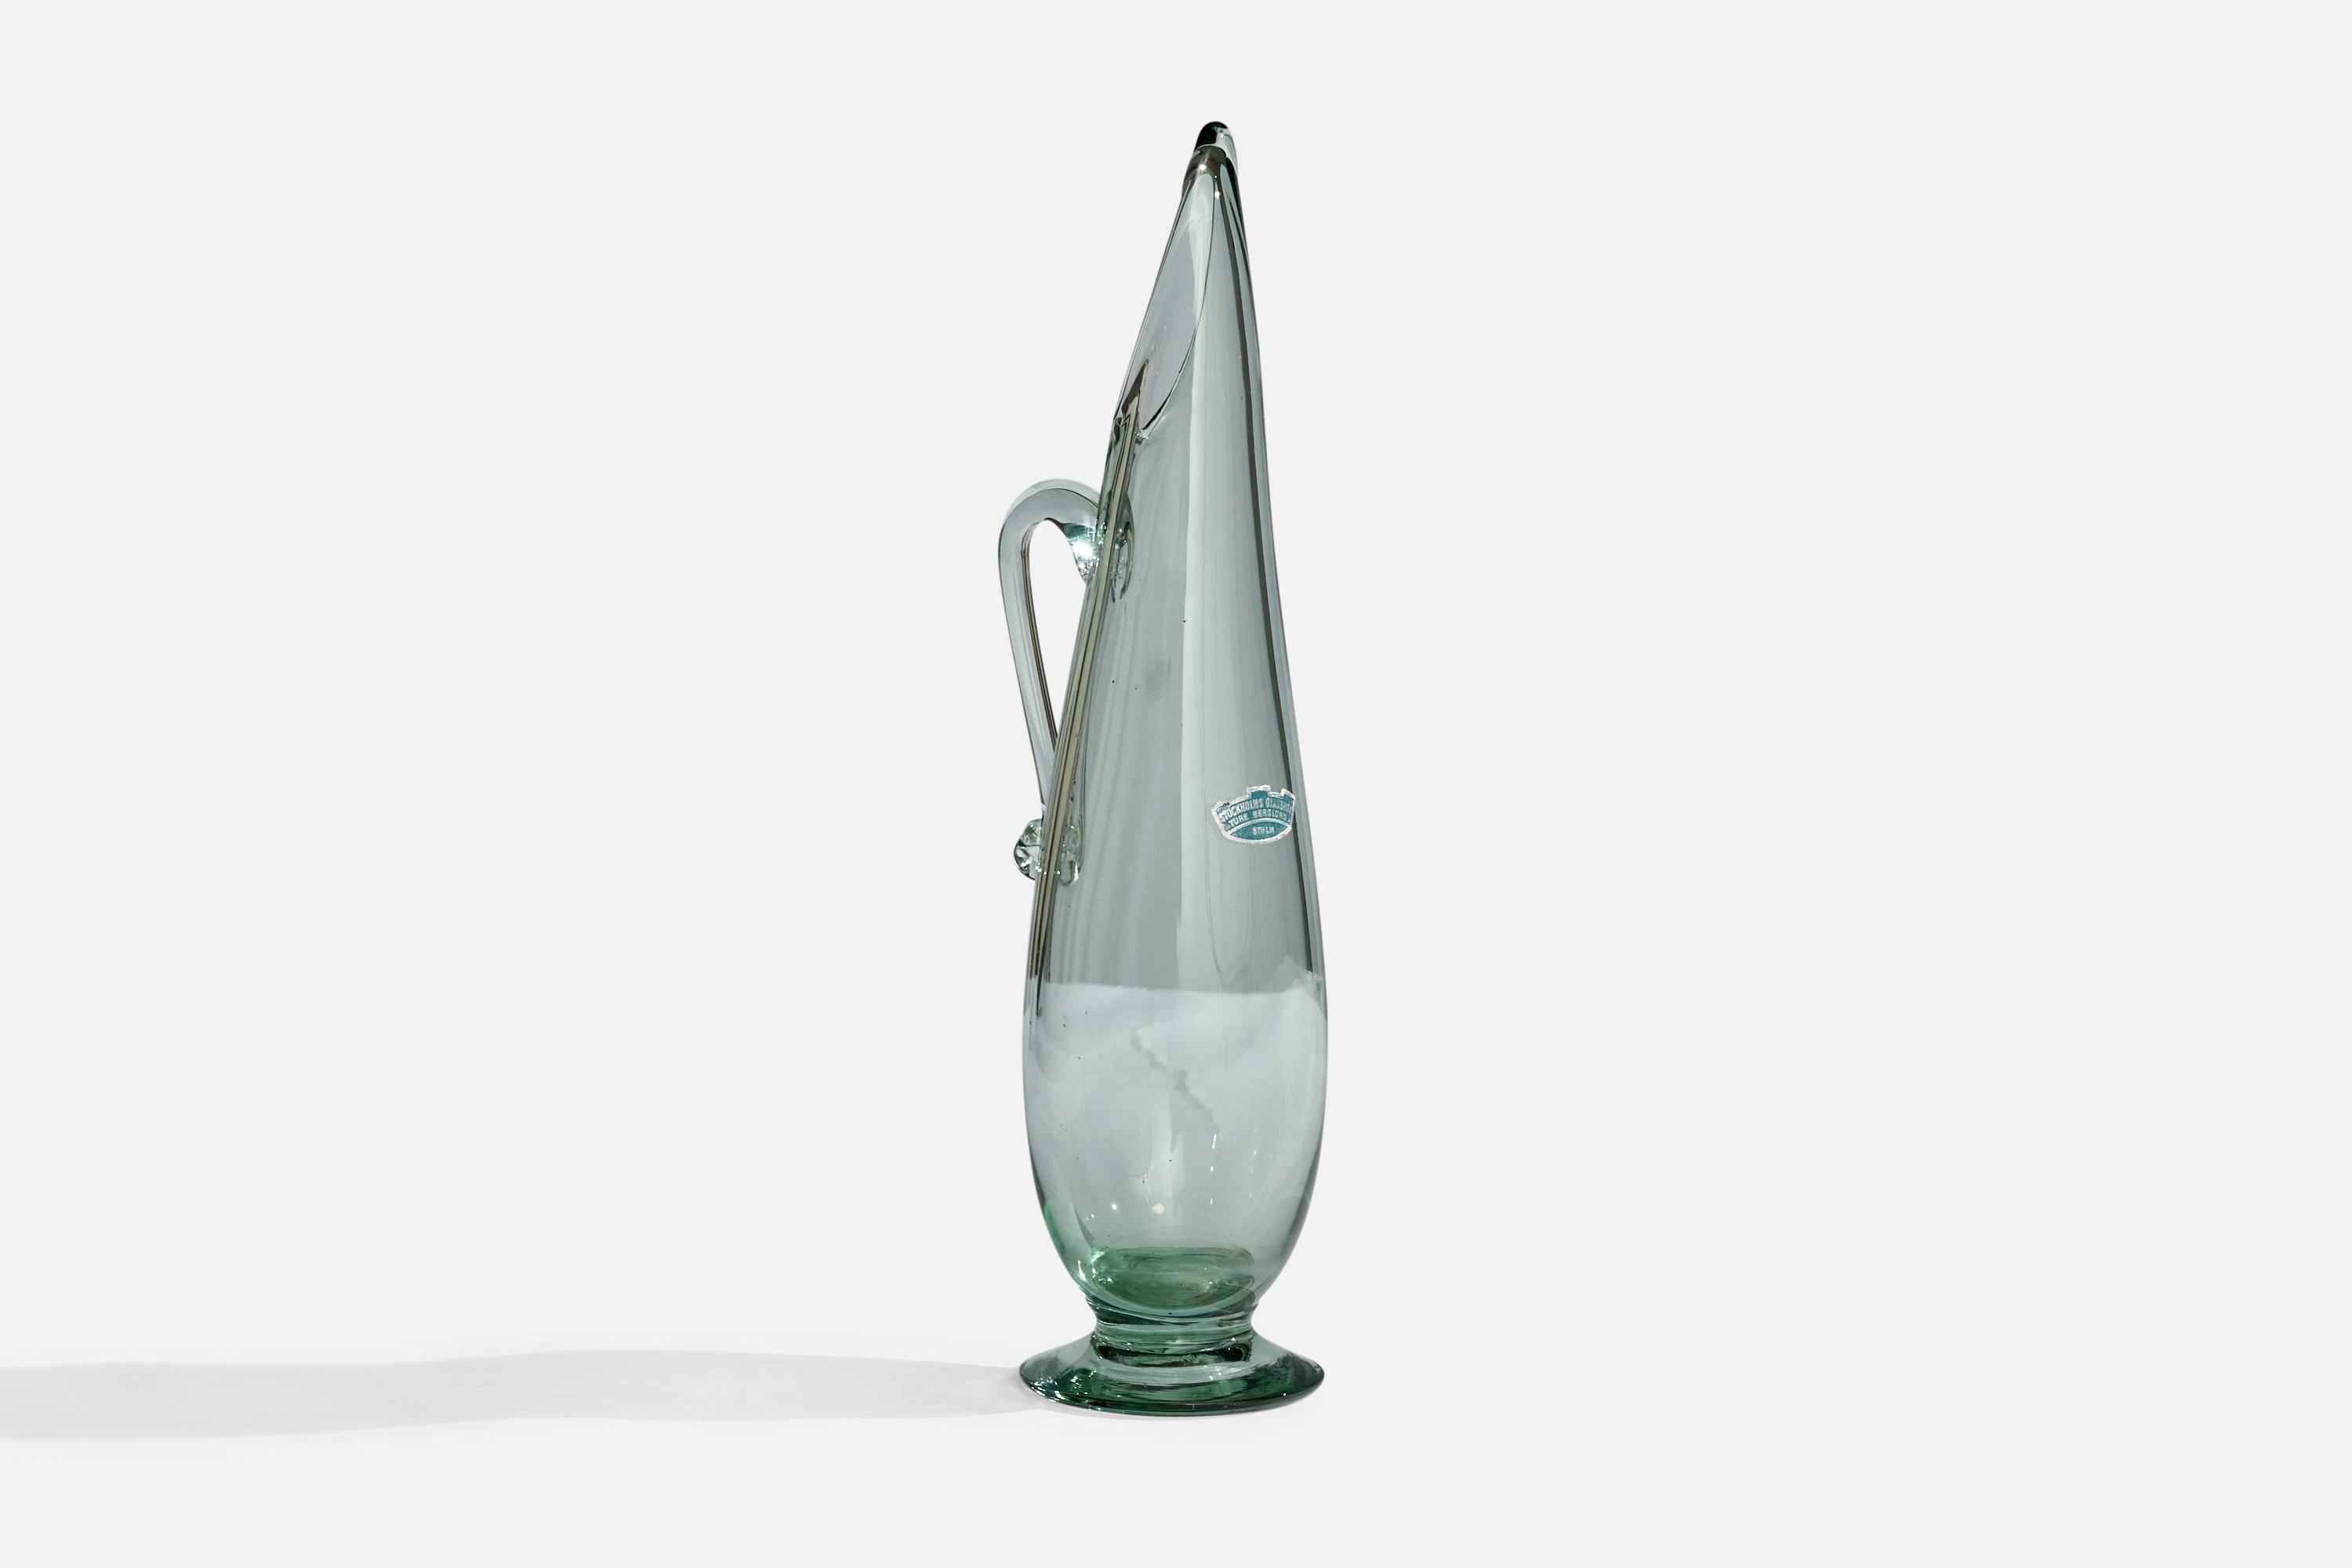 A small blown glass pitcher designed by Ture Berglund and produced by Skansens Glasbruk, Sweden, 1940s.